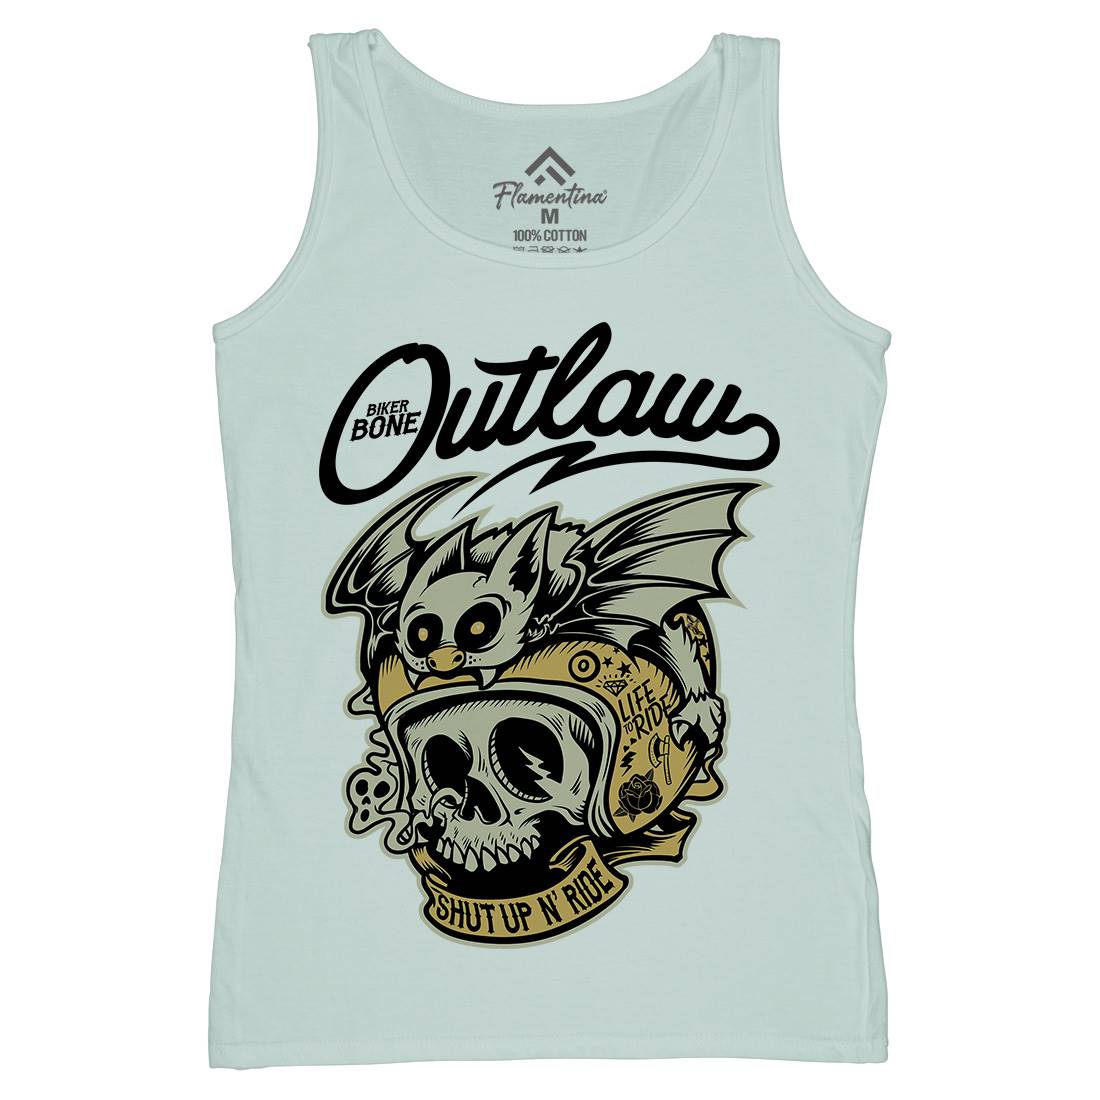 Outlaw Womens Organic Tank Top Vest Motorcycles D063